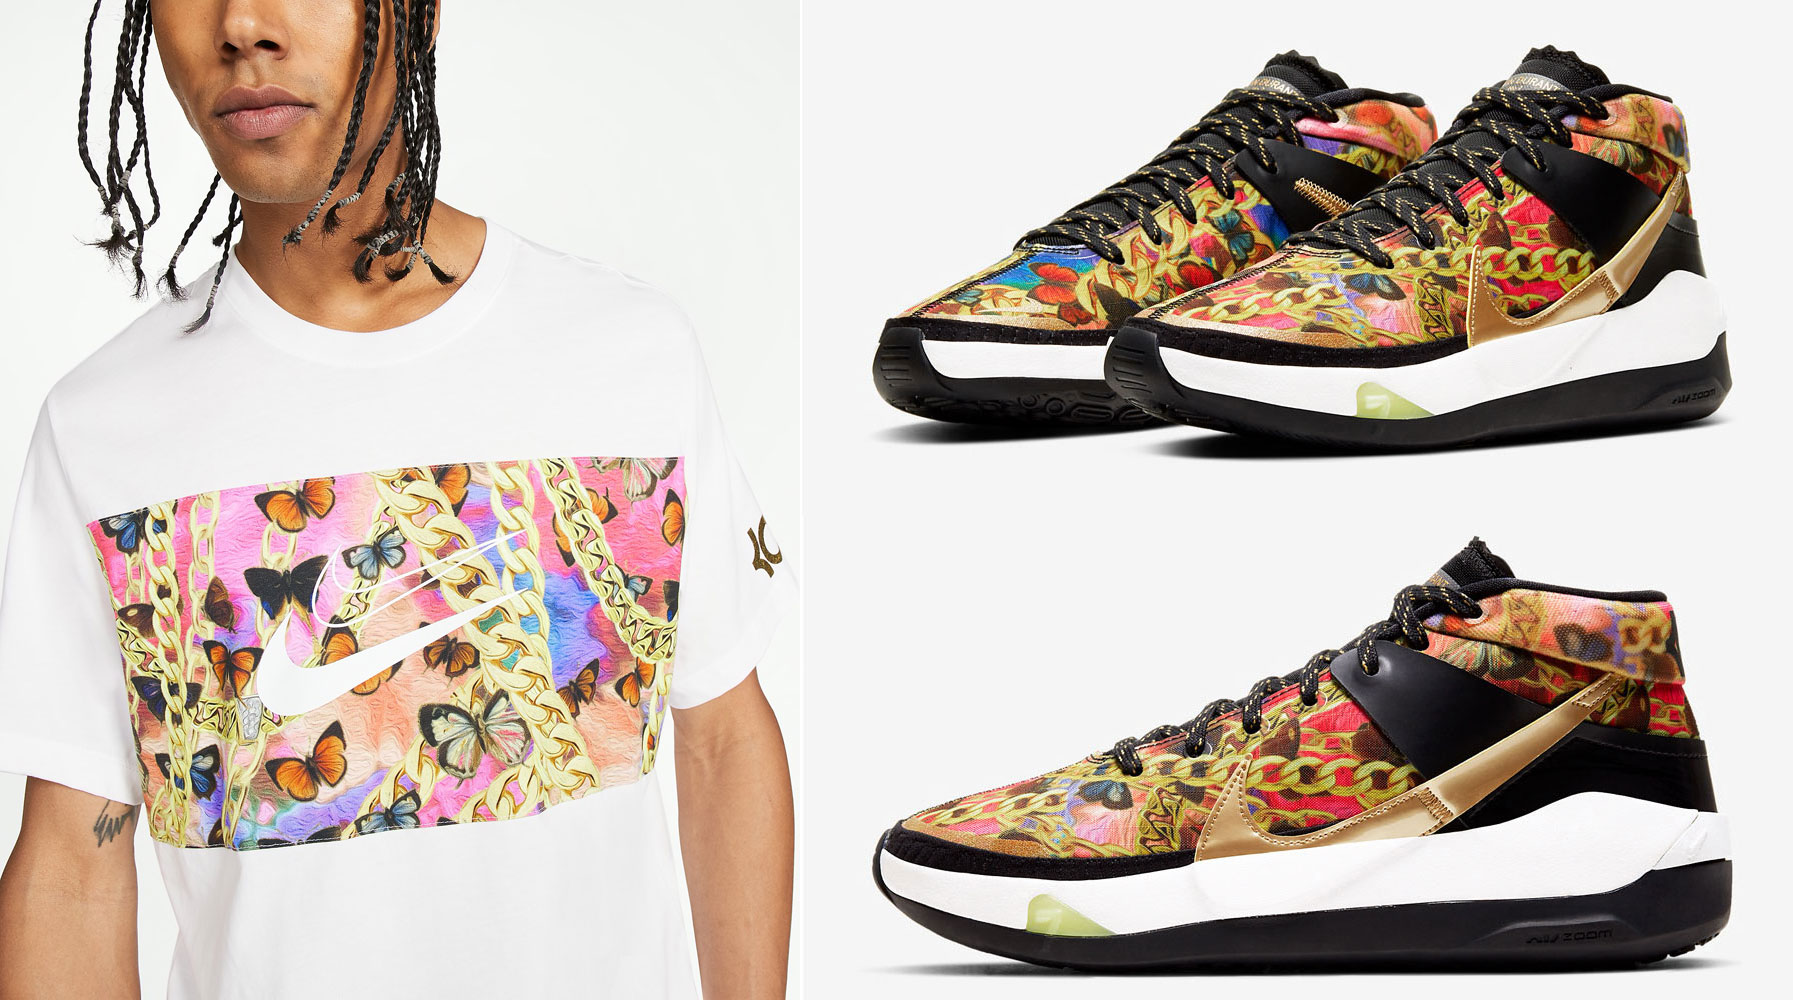 nike-kd-13-hype-butterflies-and-chains-shirt